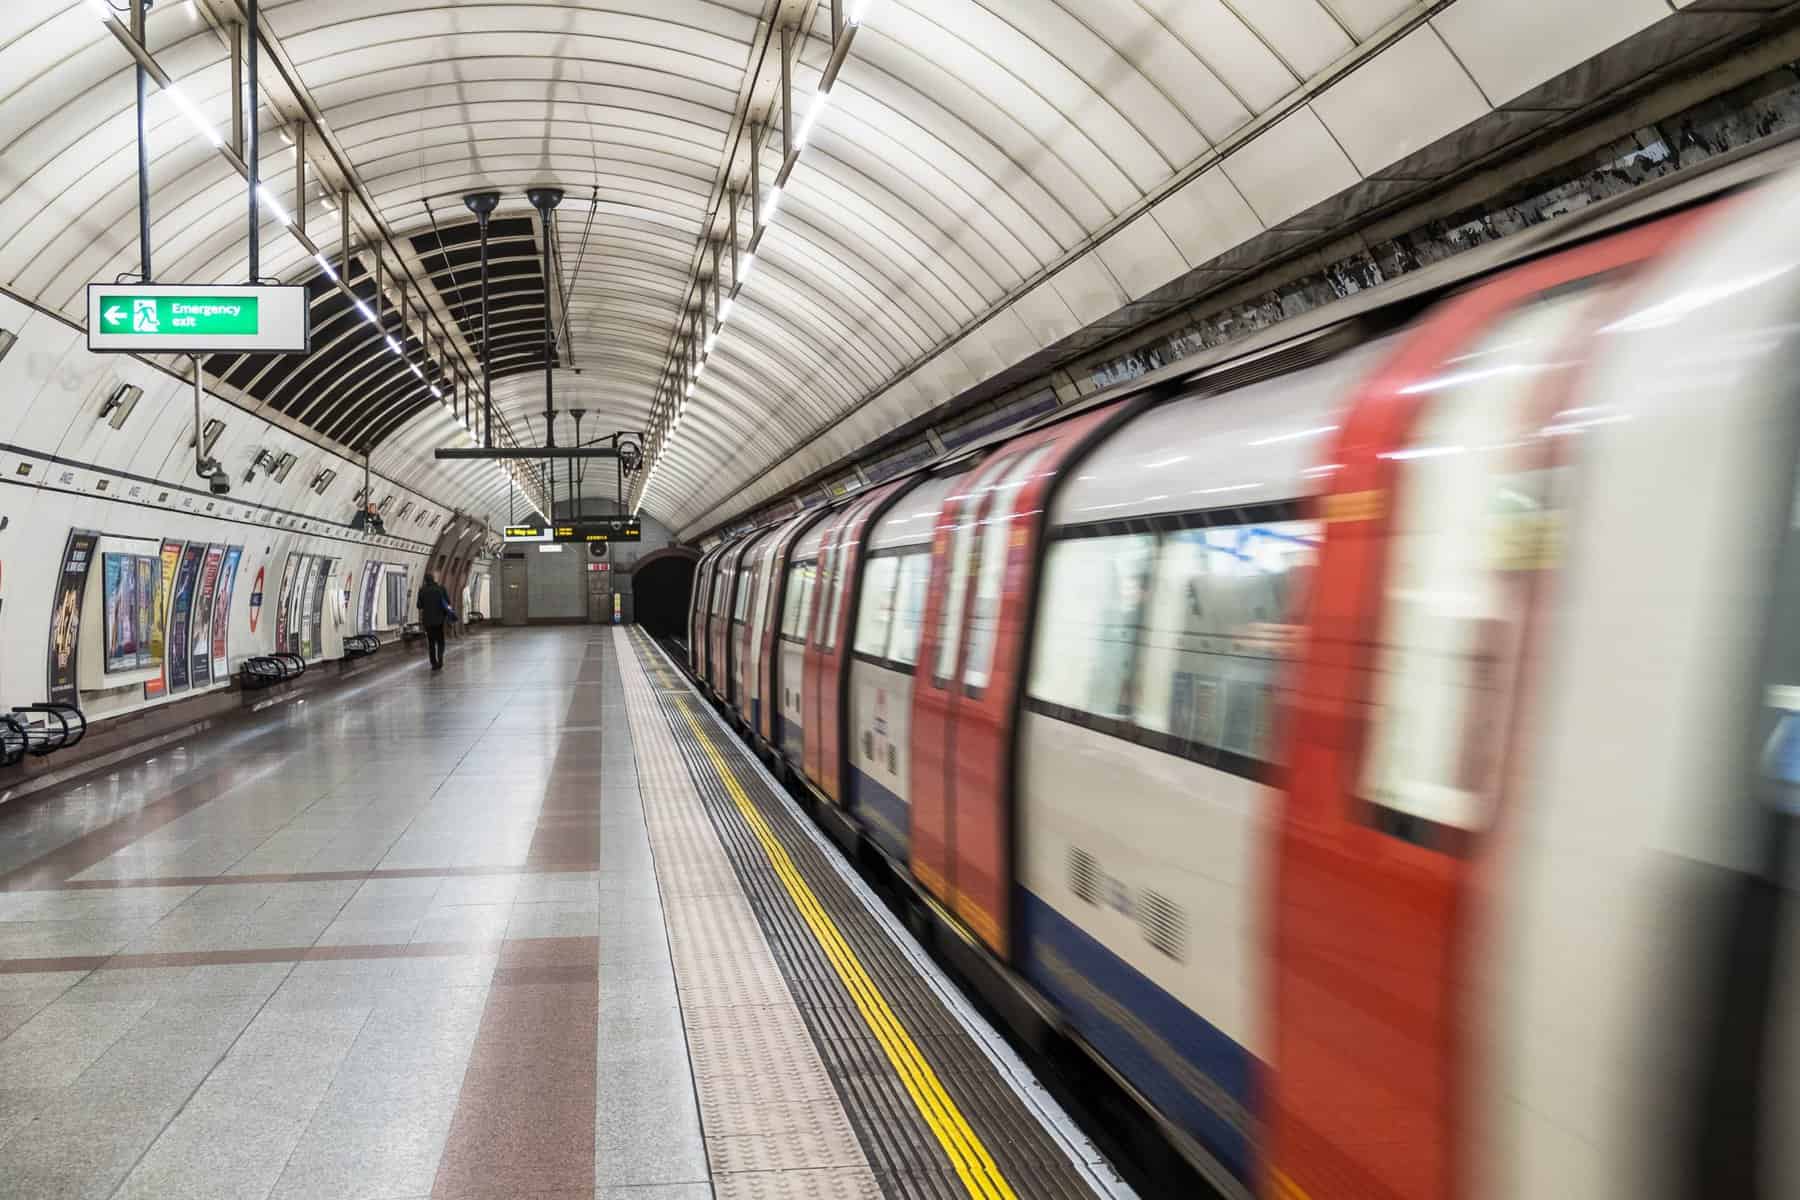 A motion photo of London's tube departing a station